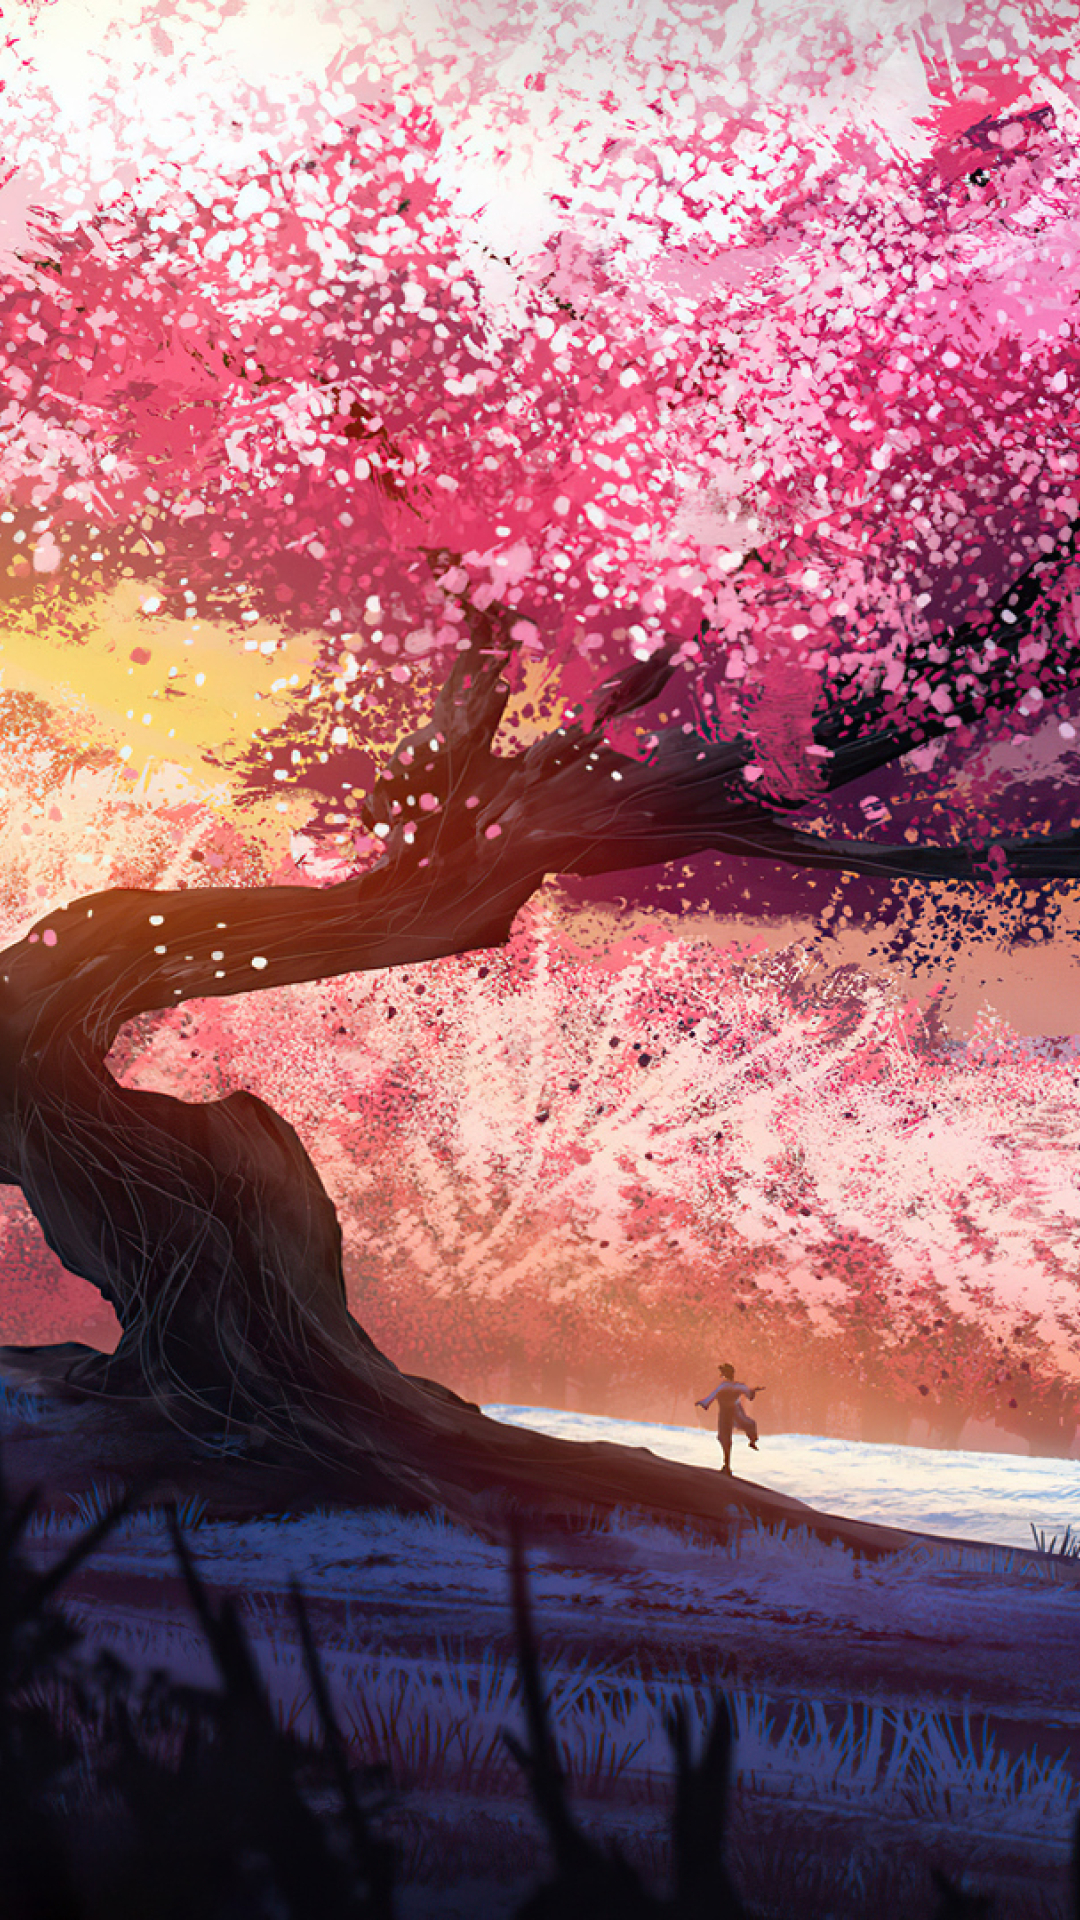 Stunning cherry blossom wallpaper anime for your device wallpaper